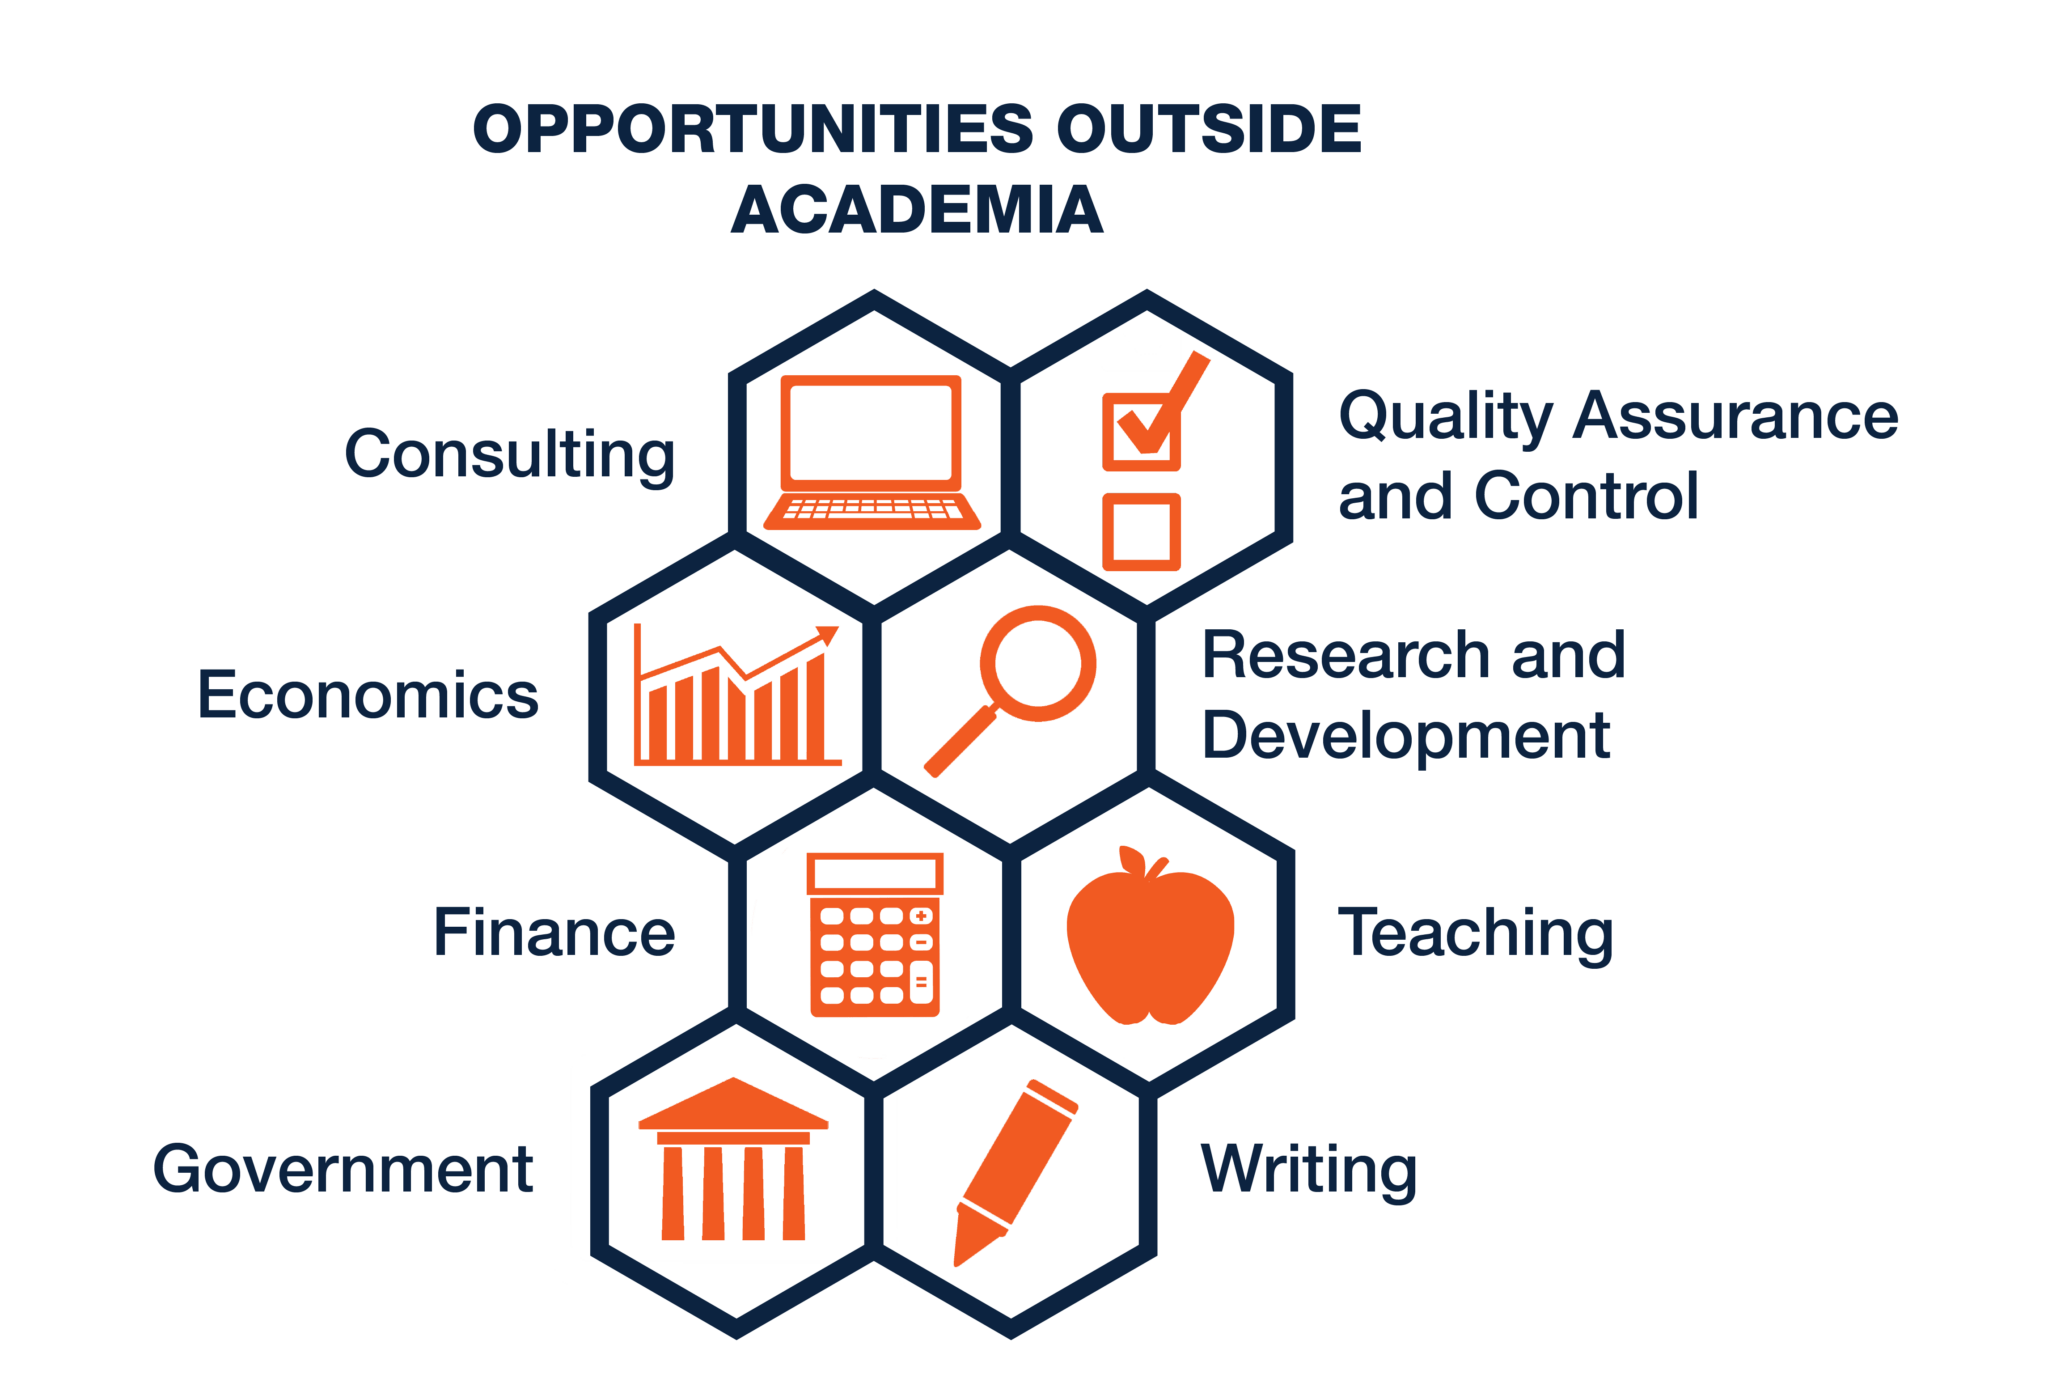 Research opportunities outside academia include consulting, economics, finance, government, quality assurance and control, research and development, teaching and writing.